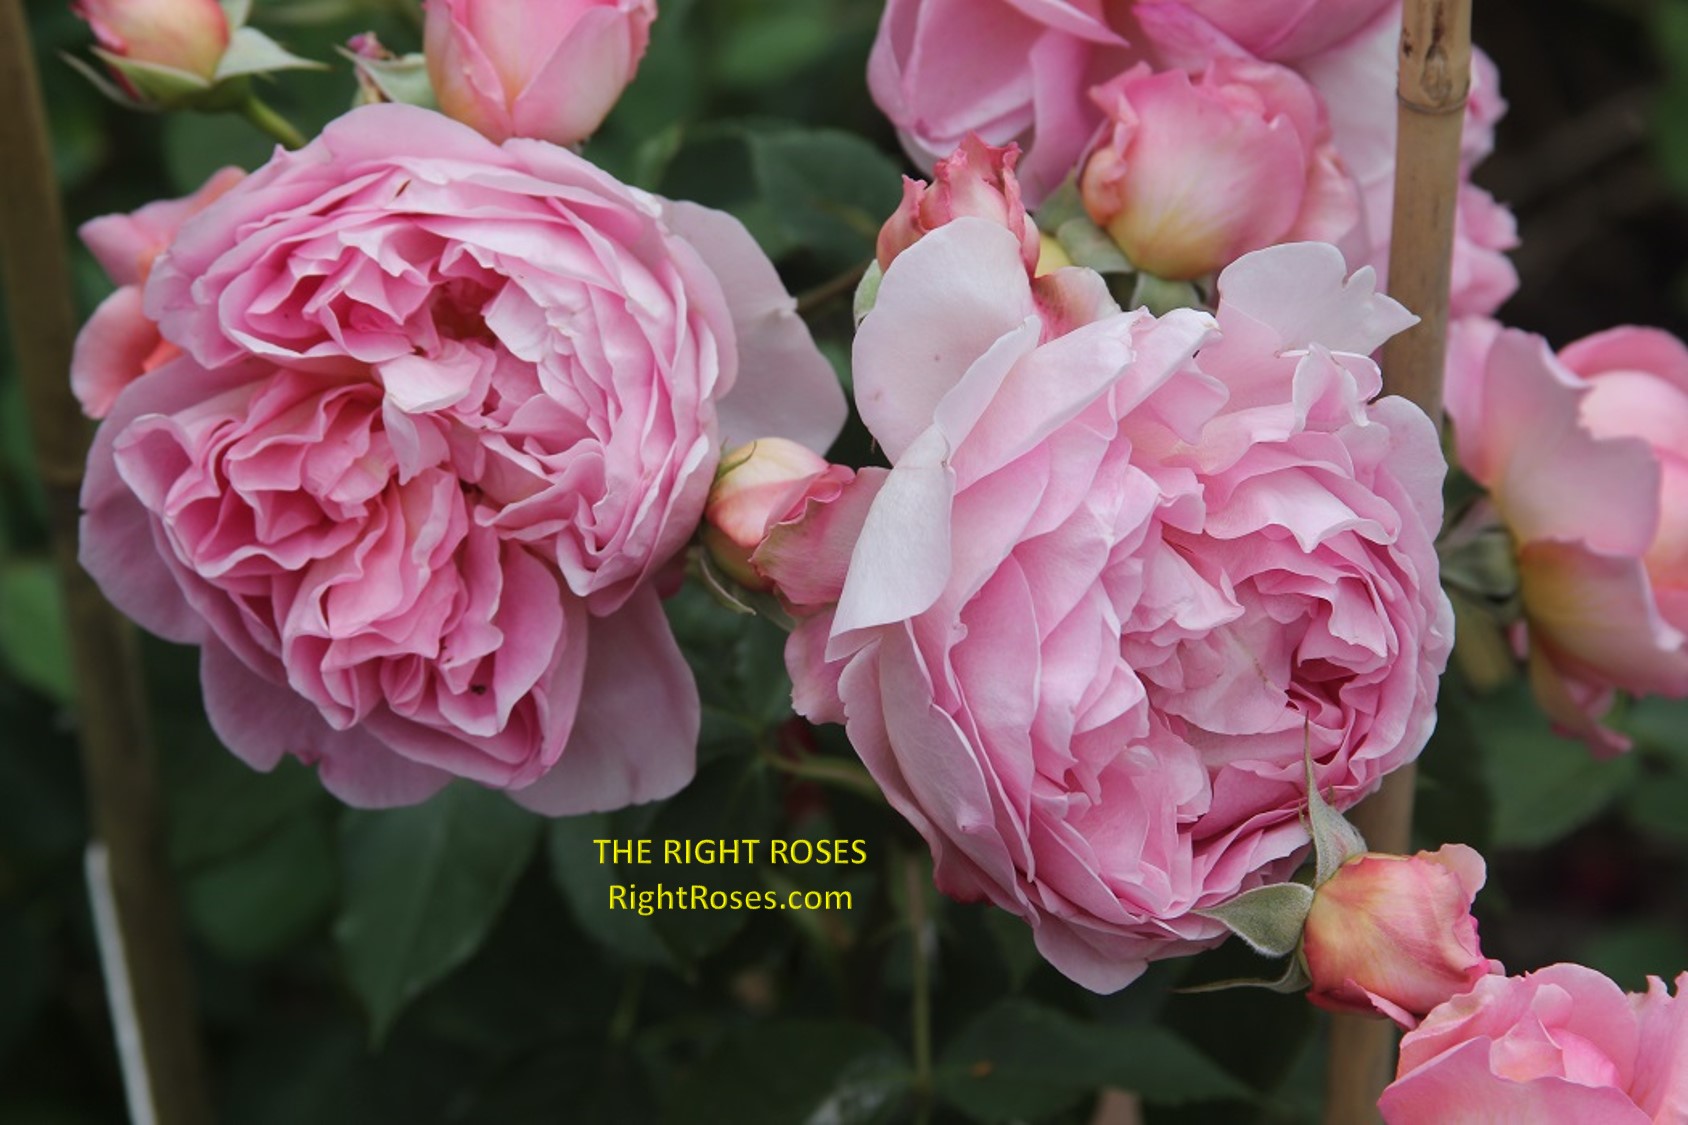 boscobel rose review the right roses score best top garden store david austin english roses rose products rose rating the right leap rose food